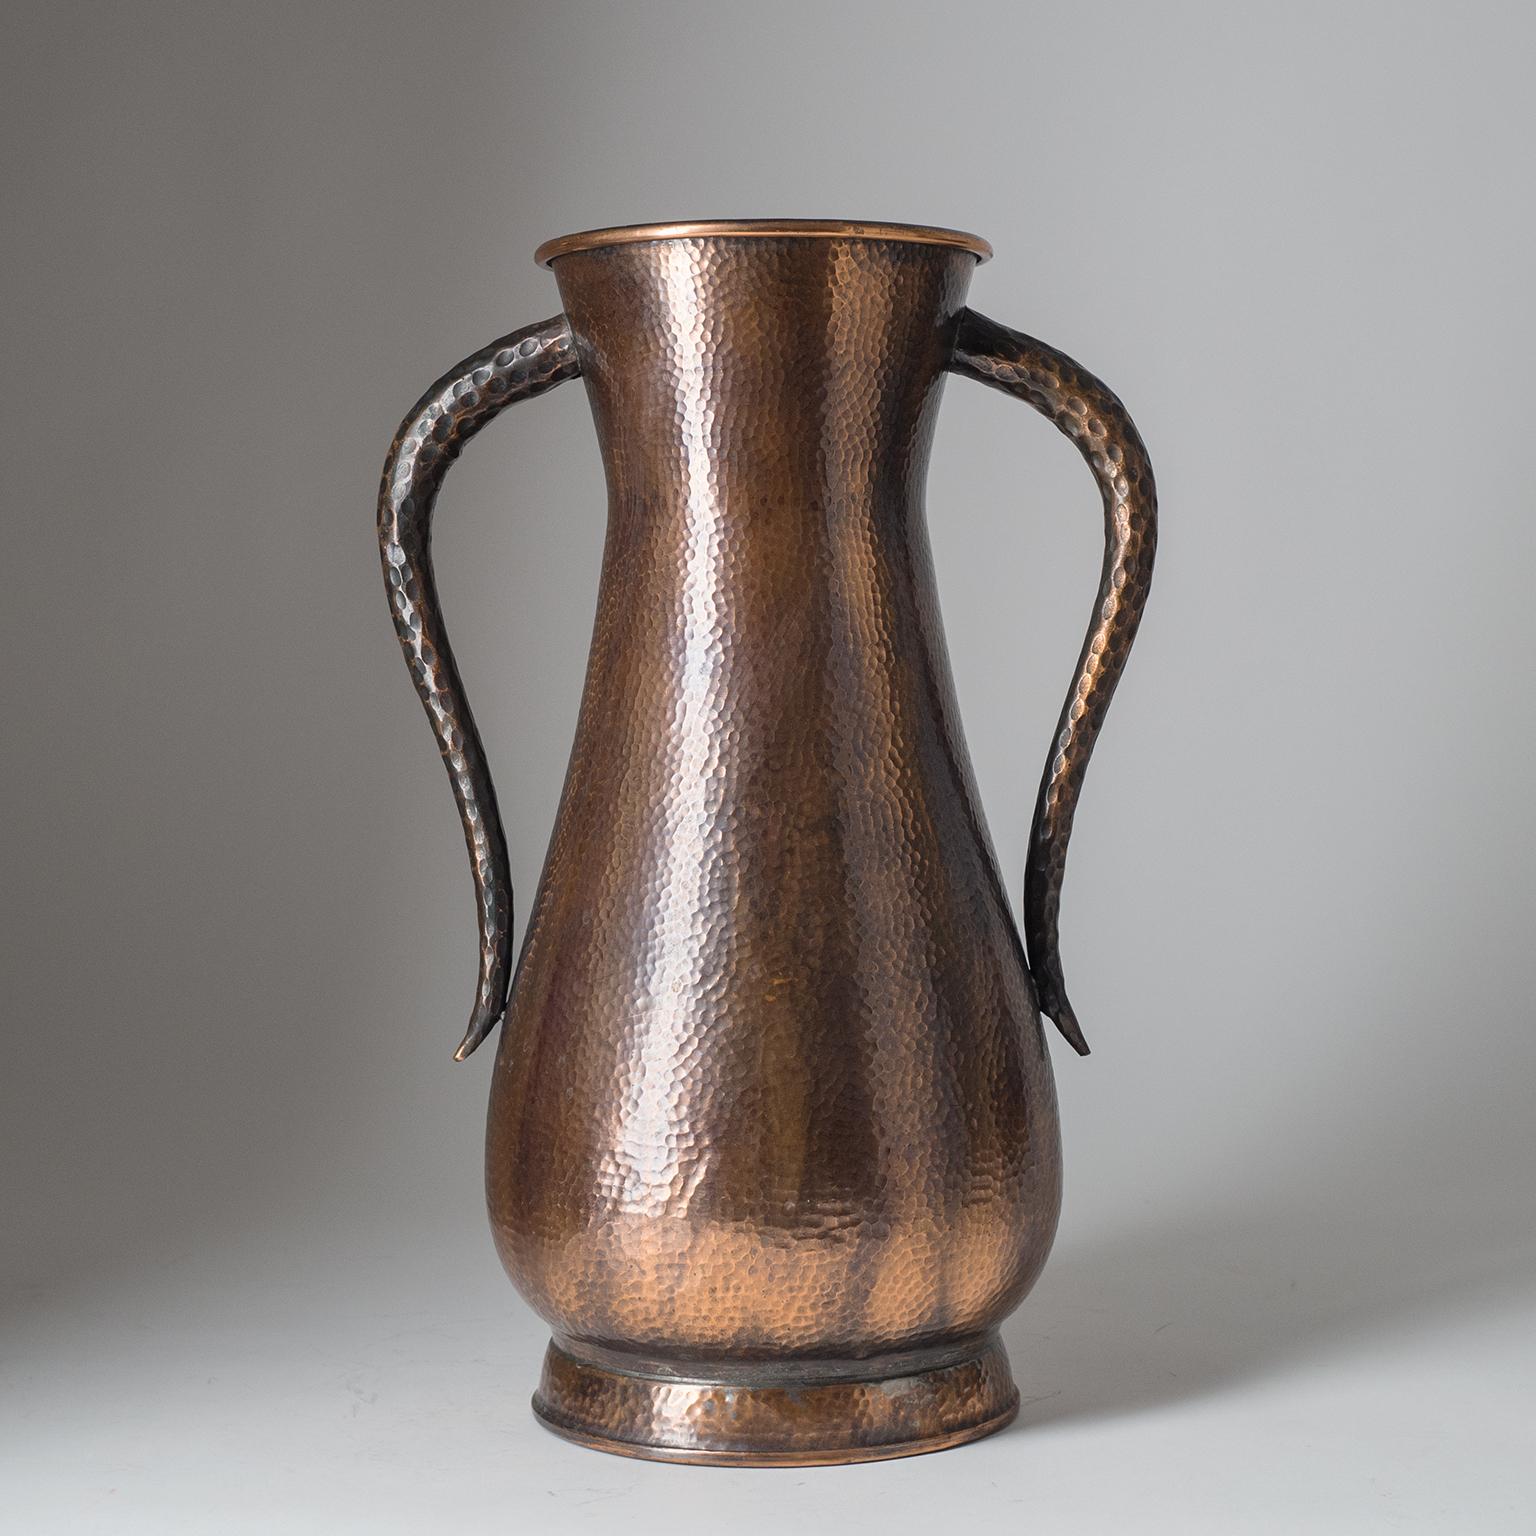 Italian hammered copper umbrella stand from the 1940-1950s.